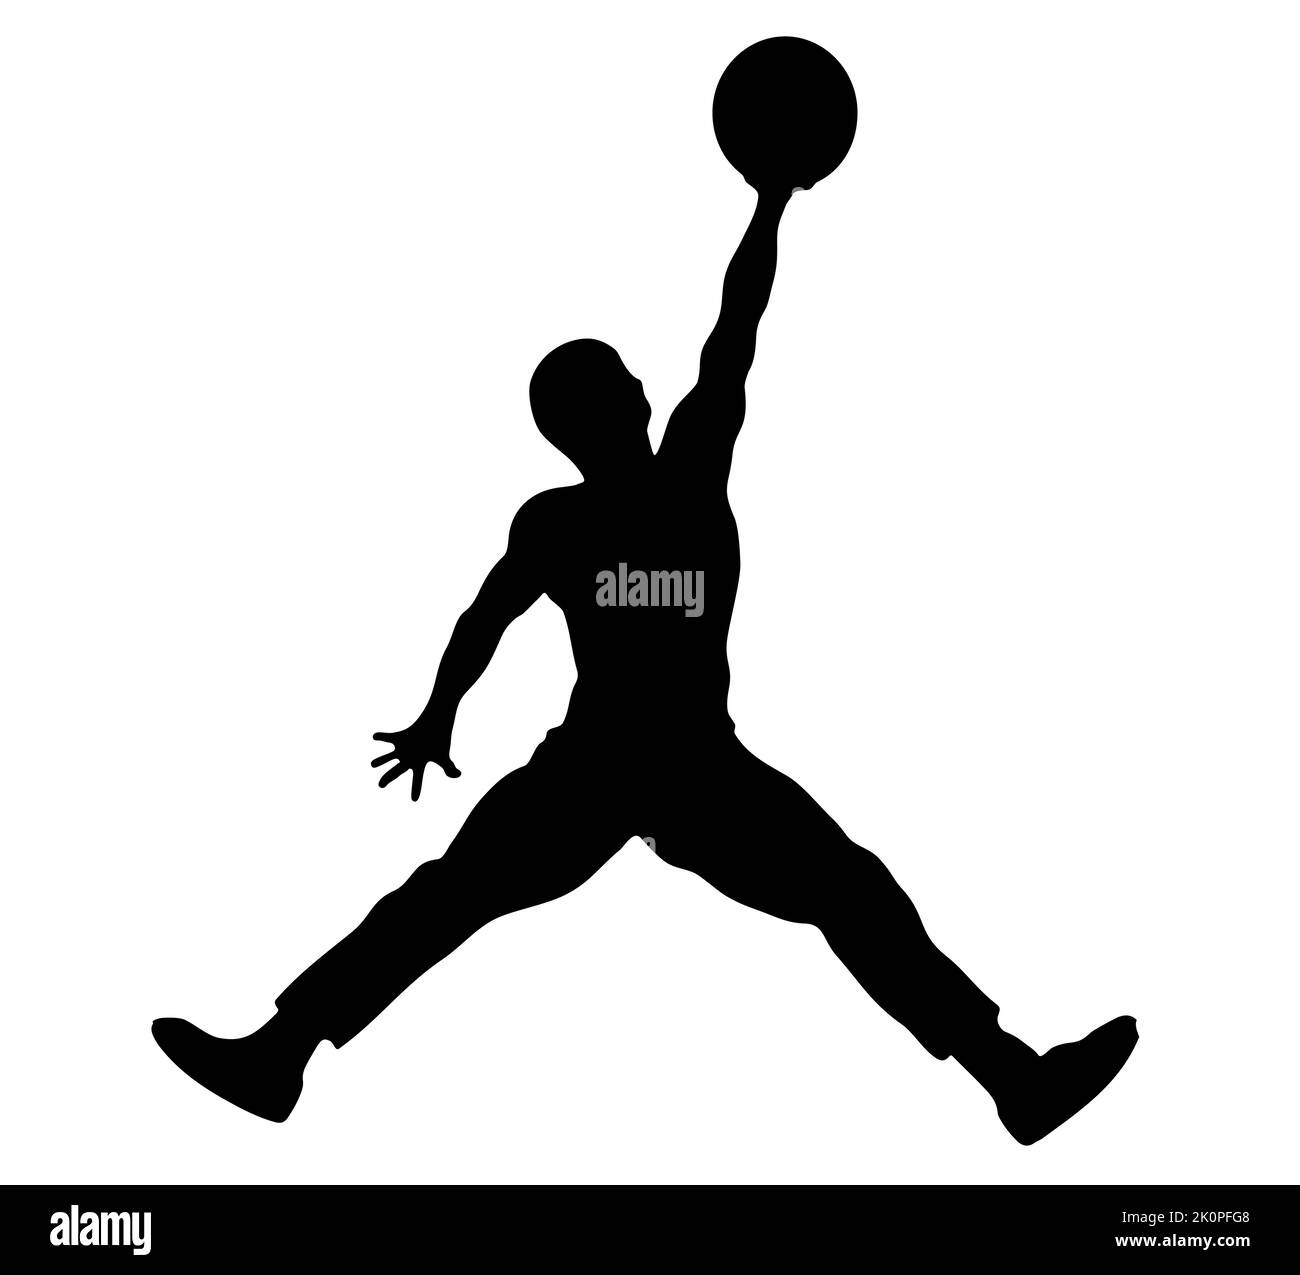 Player Holding Basketball Stretching Legs Athlete Silhouette Illustration Training Game Sport Stock Vector